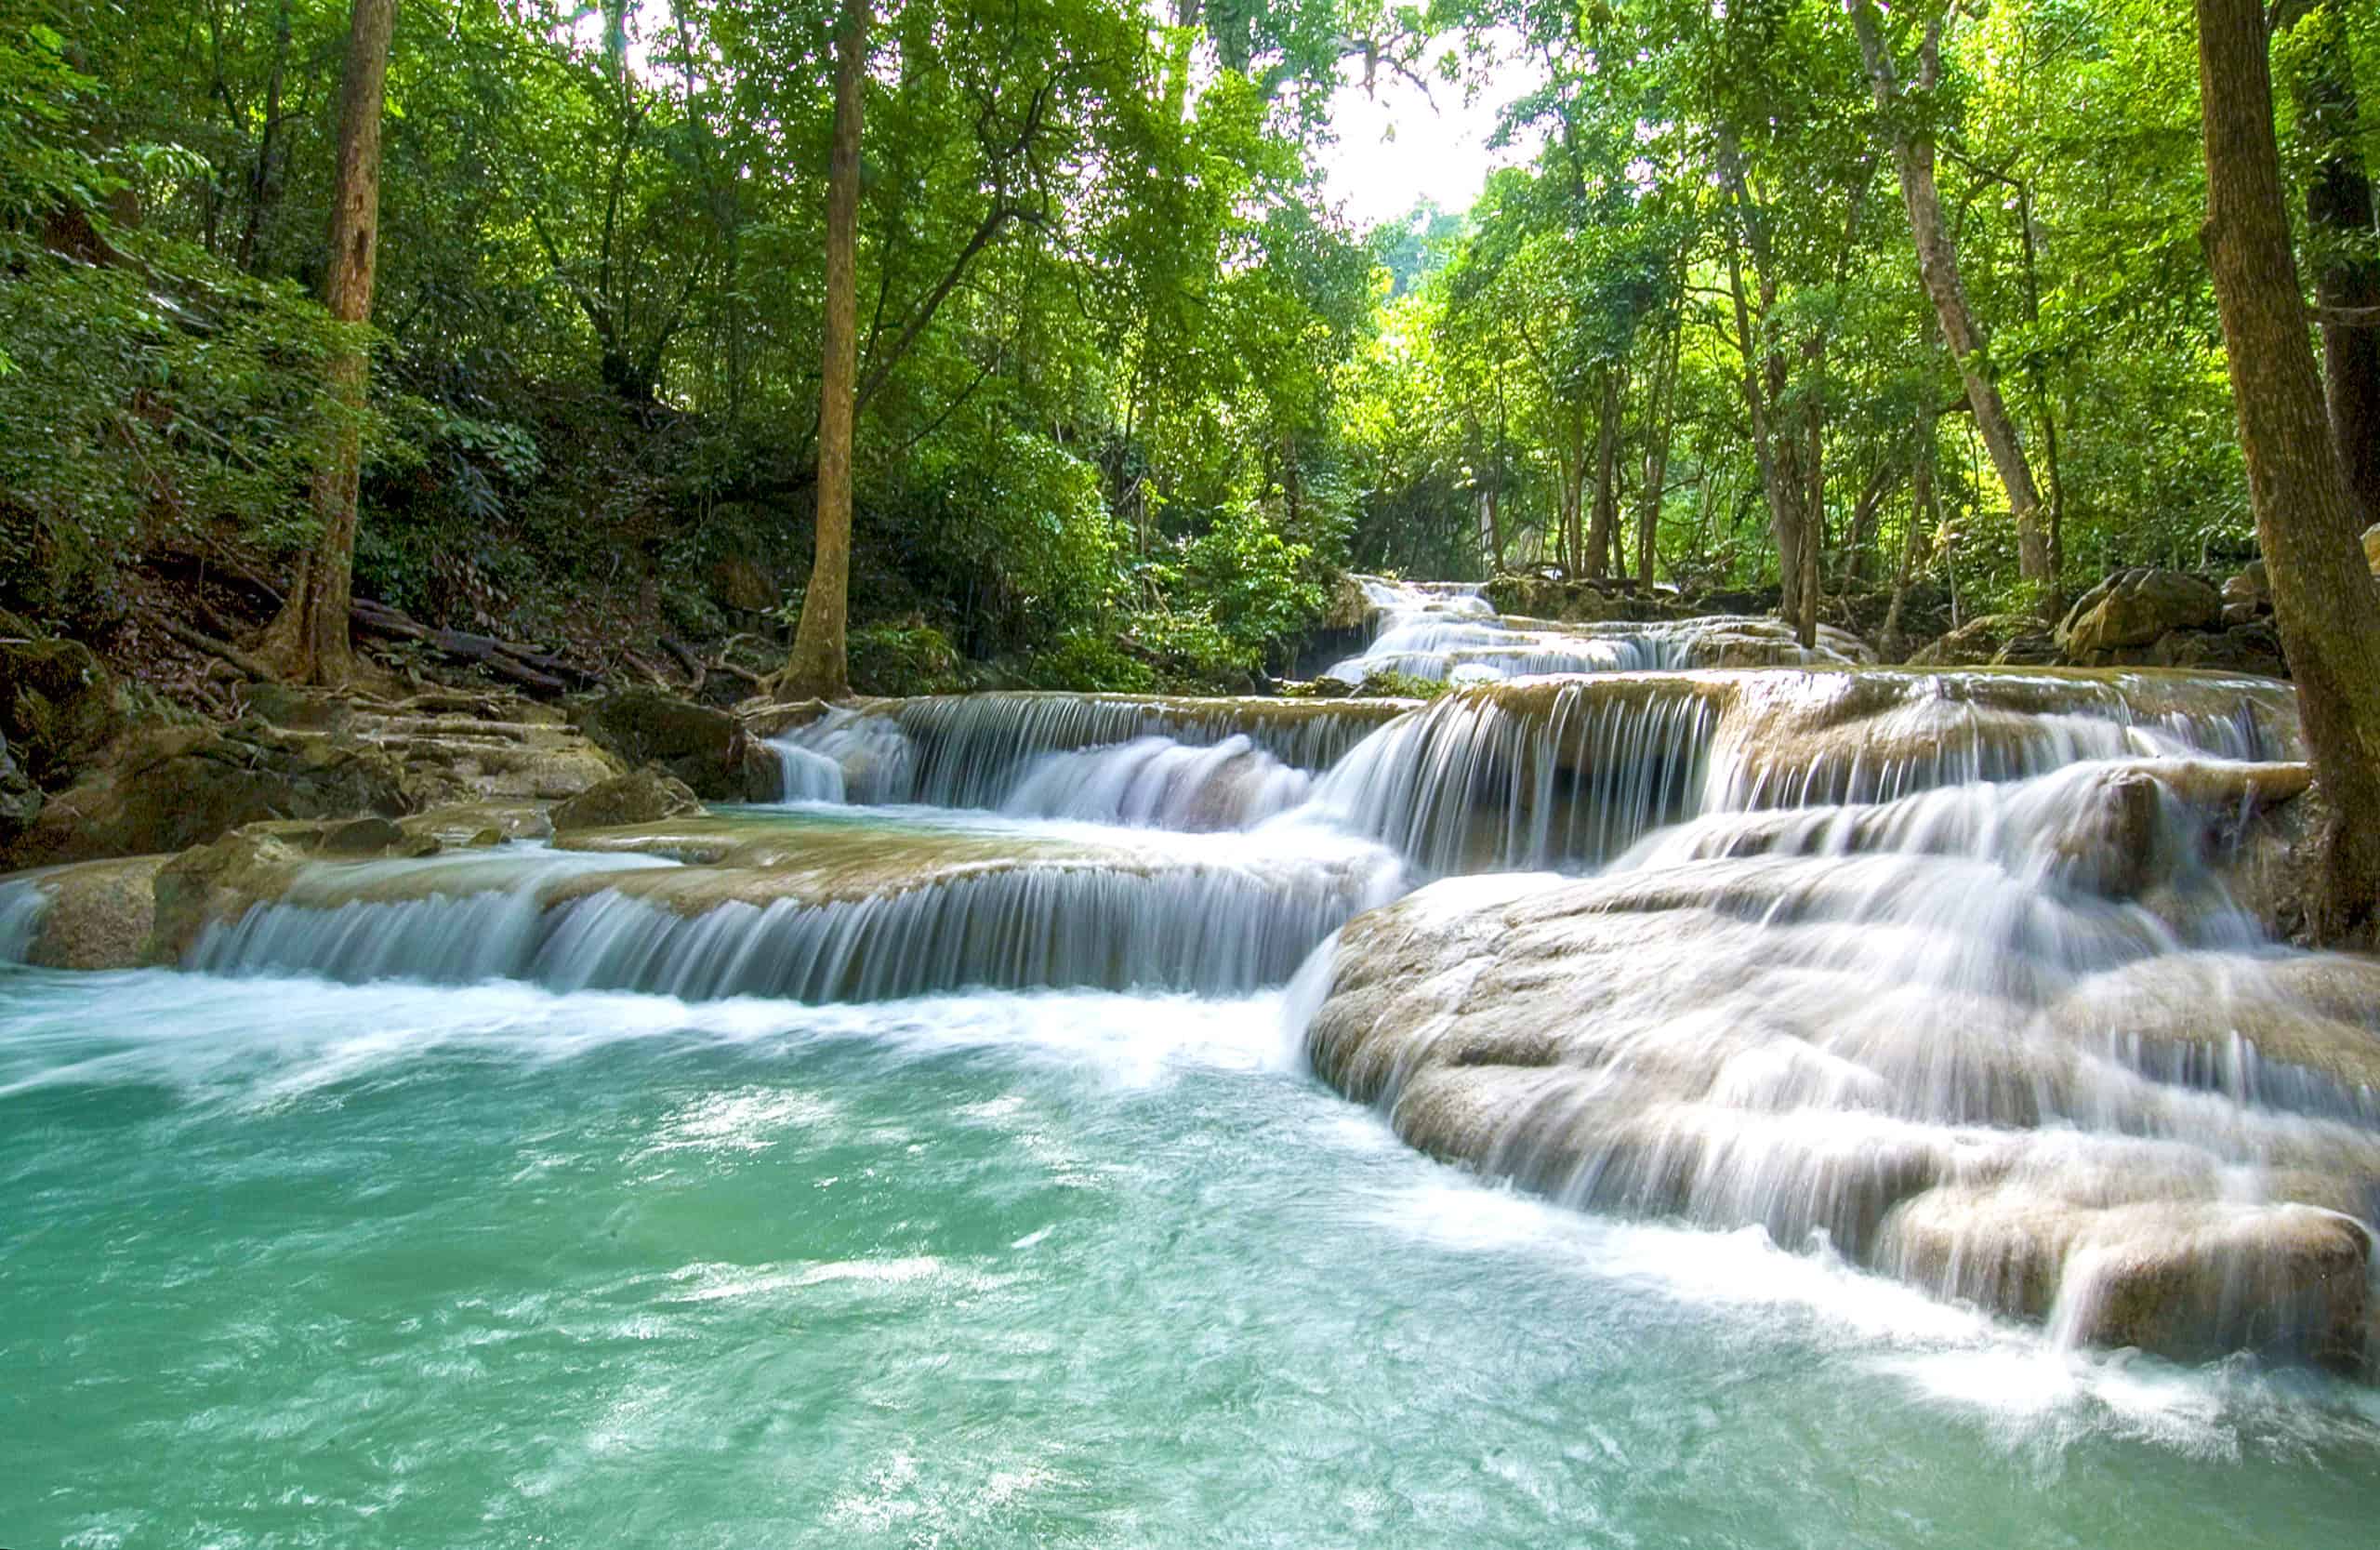 Tiered waterfalls with turquoise water pools within a dense forest - part of the Erawan Waterfalls in Kanchanaburi, Thailand.